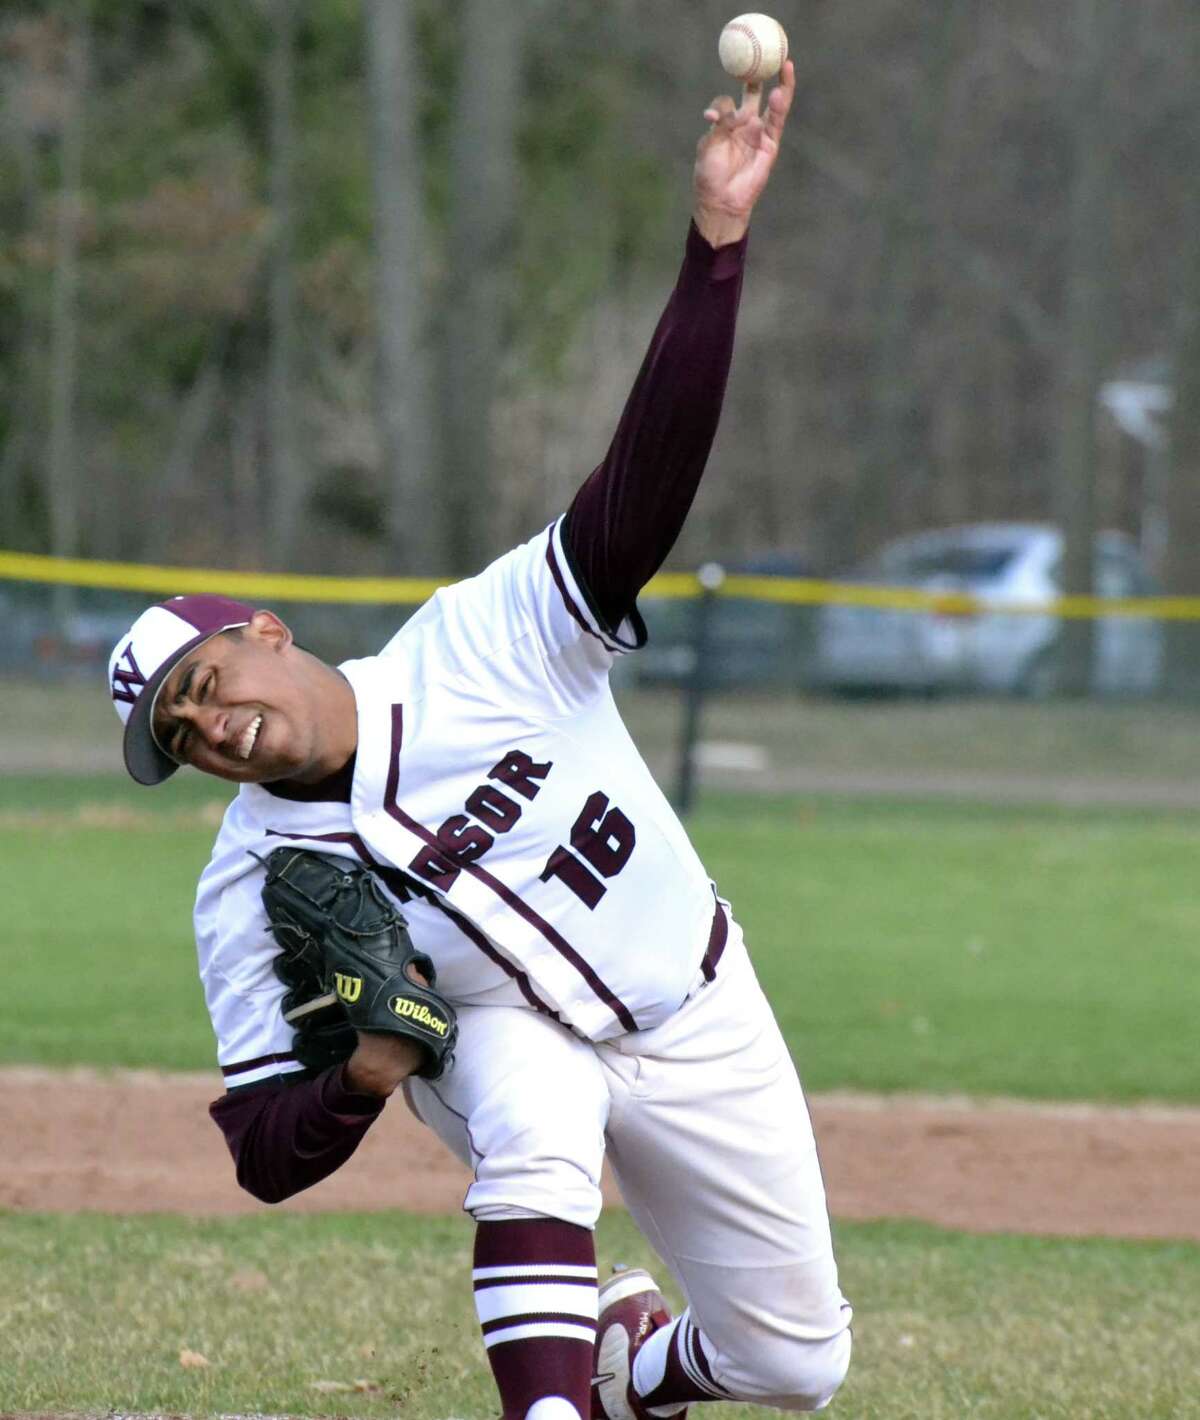 Windsor’s Alex Rosario pitches against Wethersfield on Wednesday, April 18, 2018. (Pete Paguaga, Hearst Media Group)